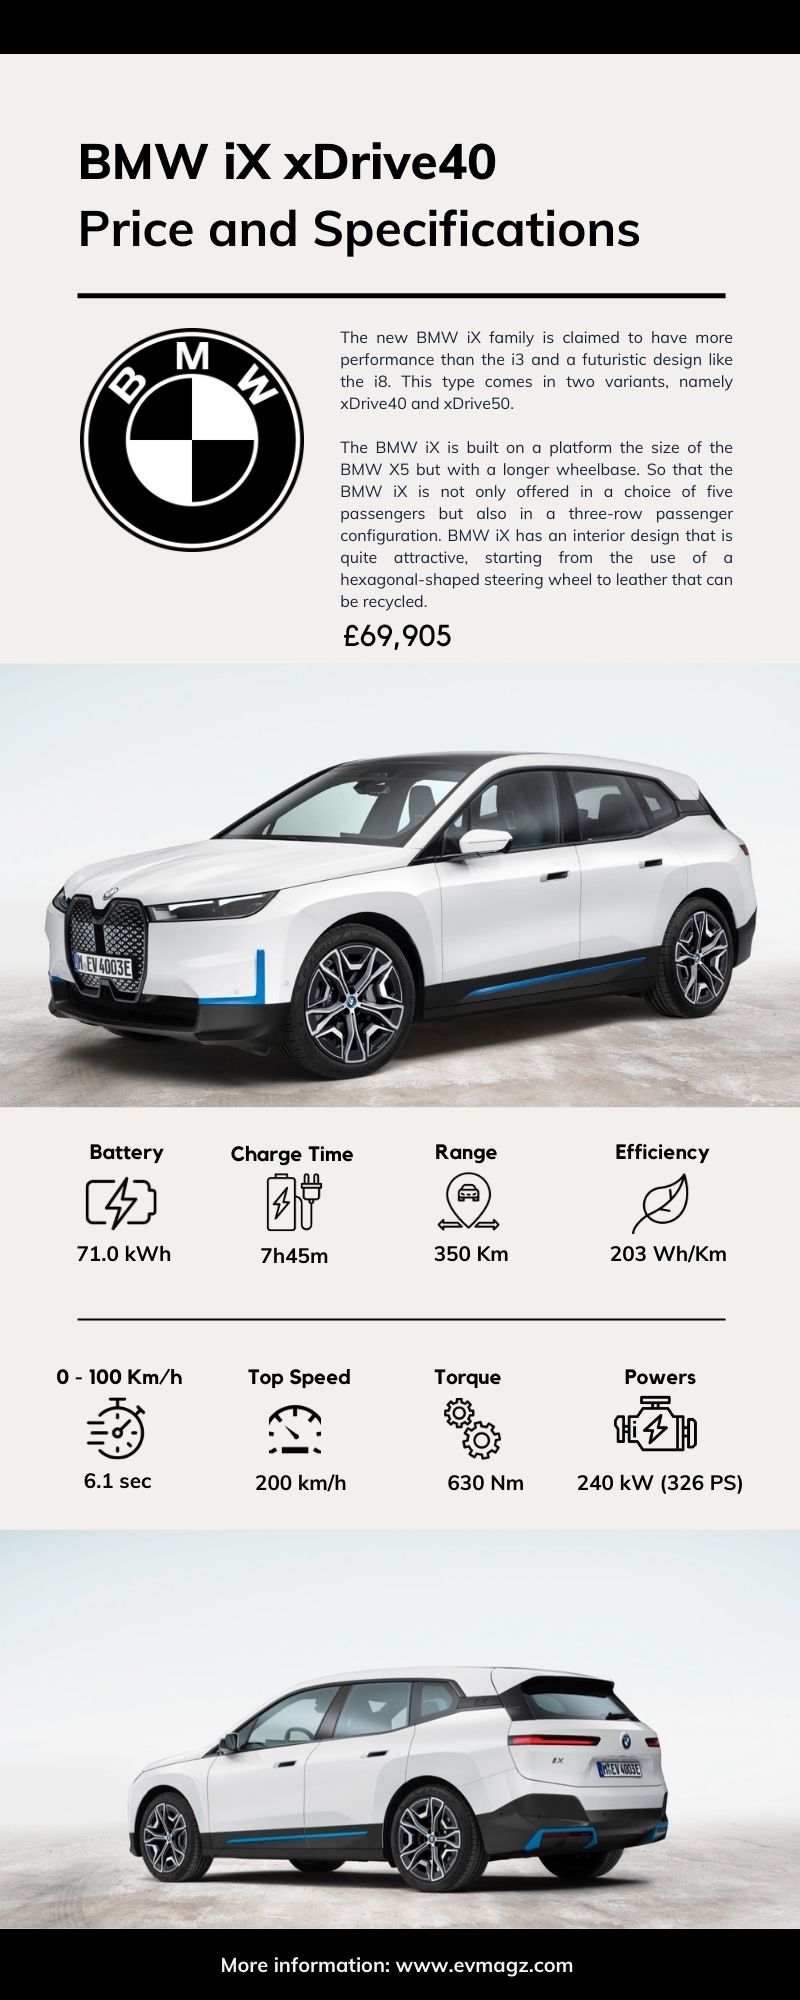 BMW iX xDrive40  Price and Specifications [Infographic]